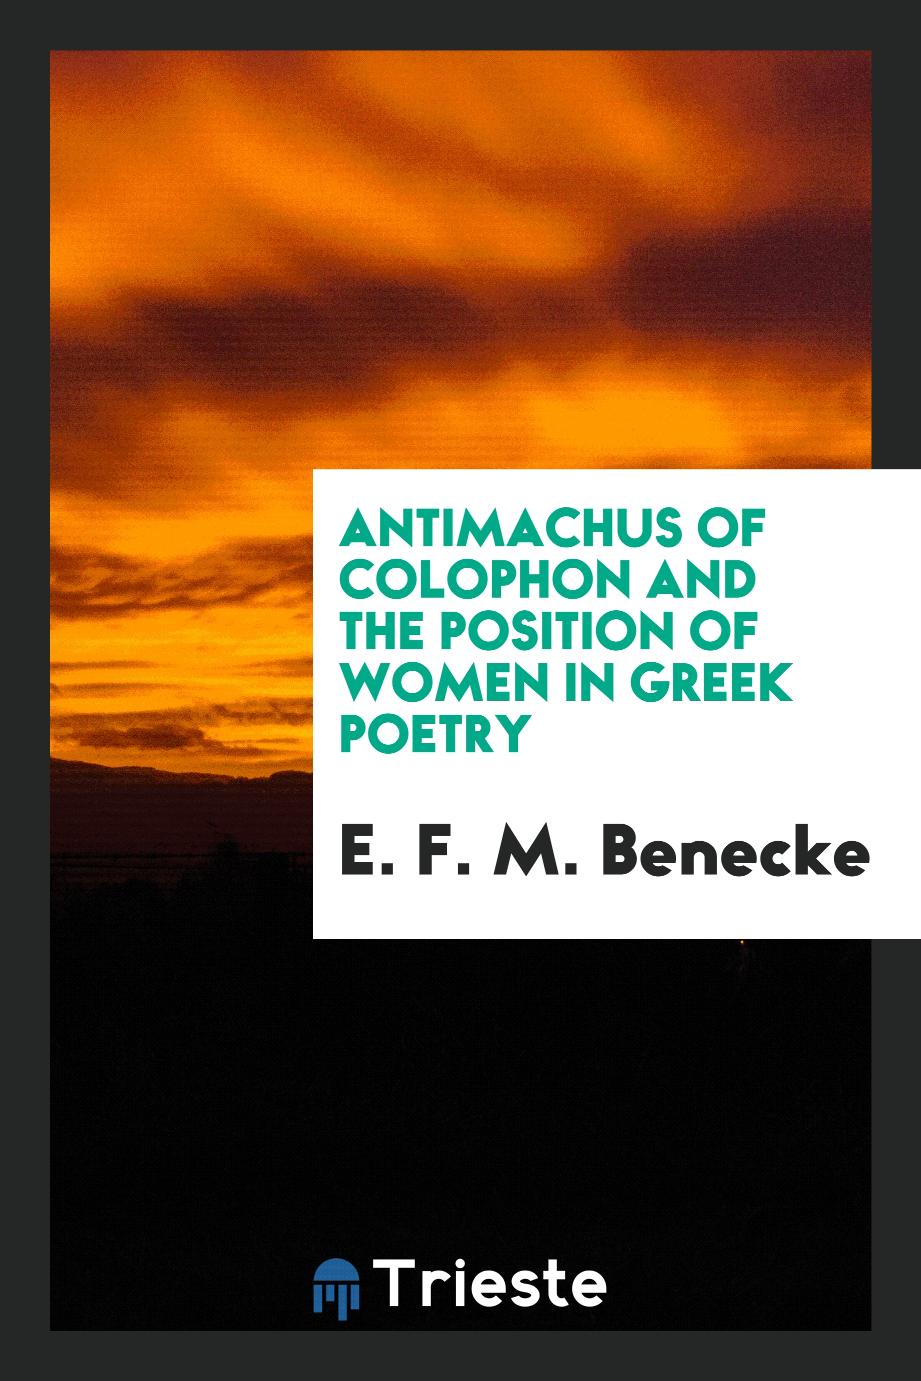 Antimachus of Colophon and the position of women in Greek poetry